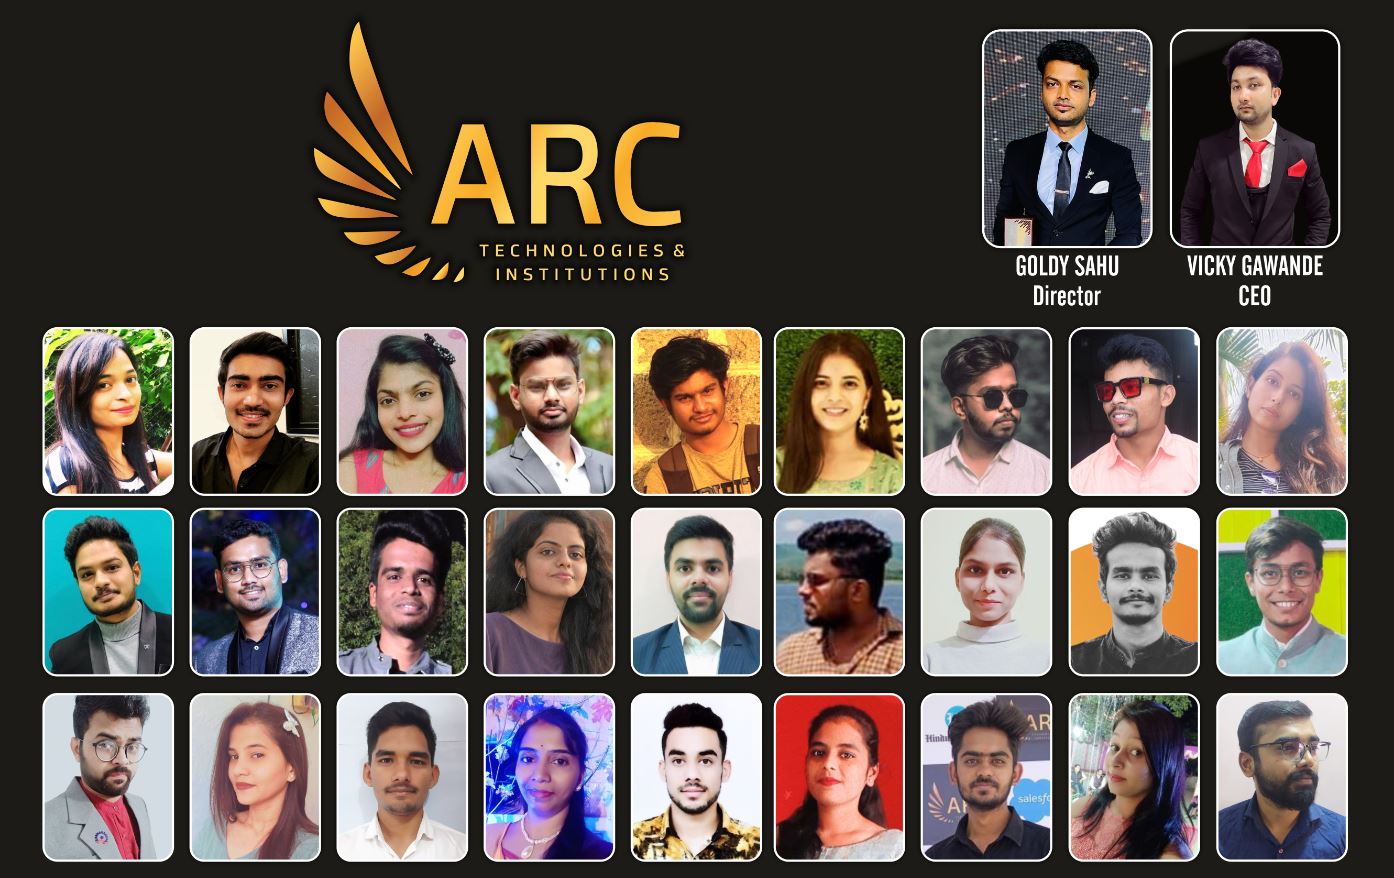 Arc technologies and institutions dainik times 